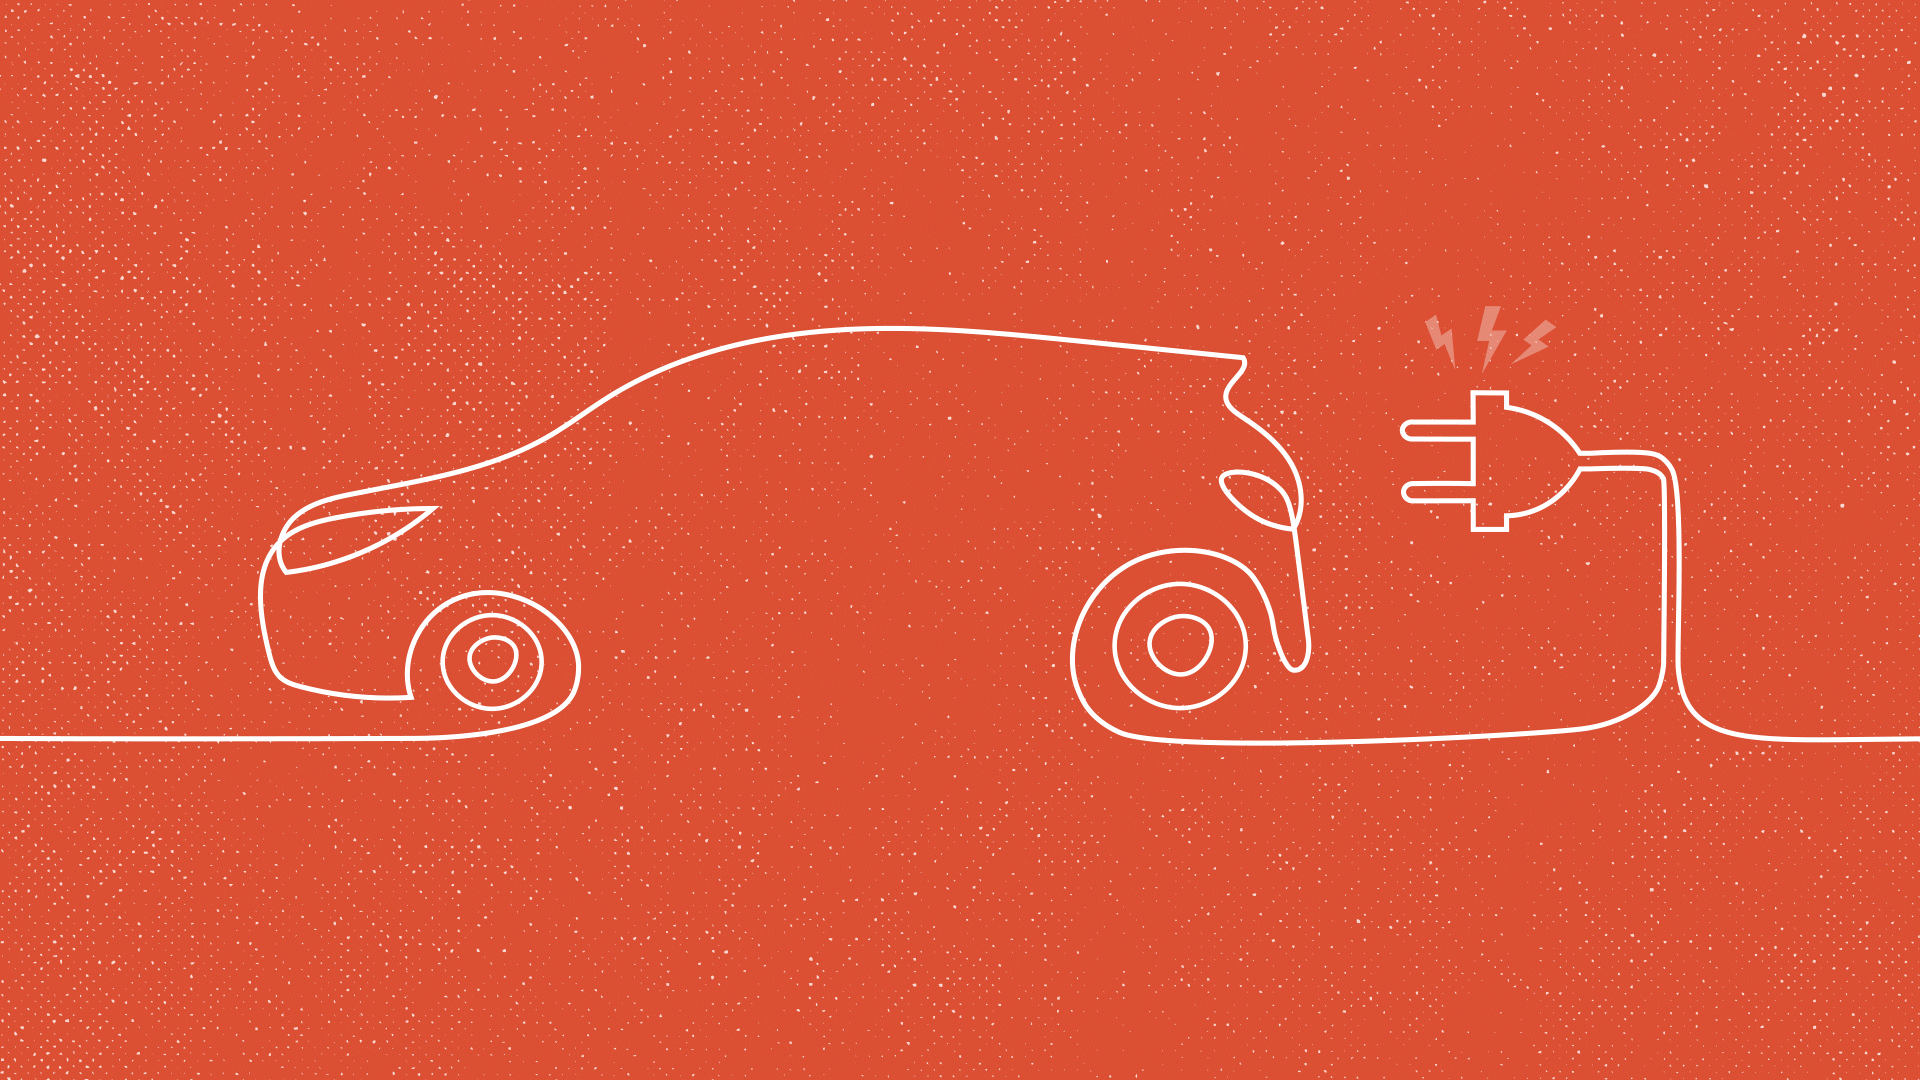 A GIF on an orange background, depicting an electric car